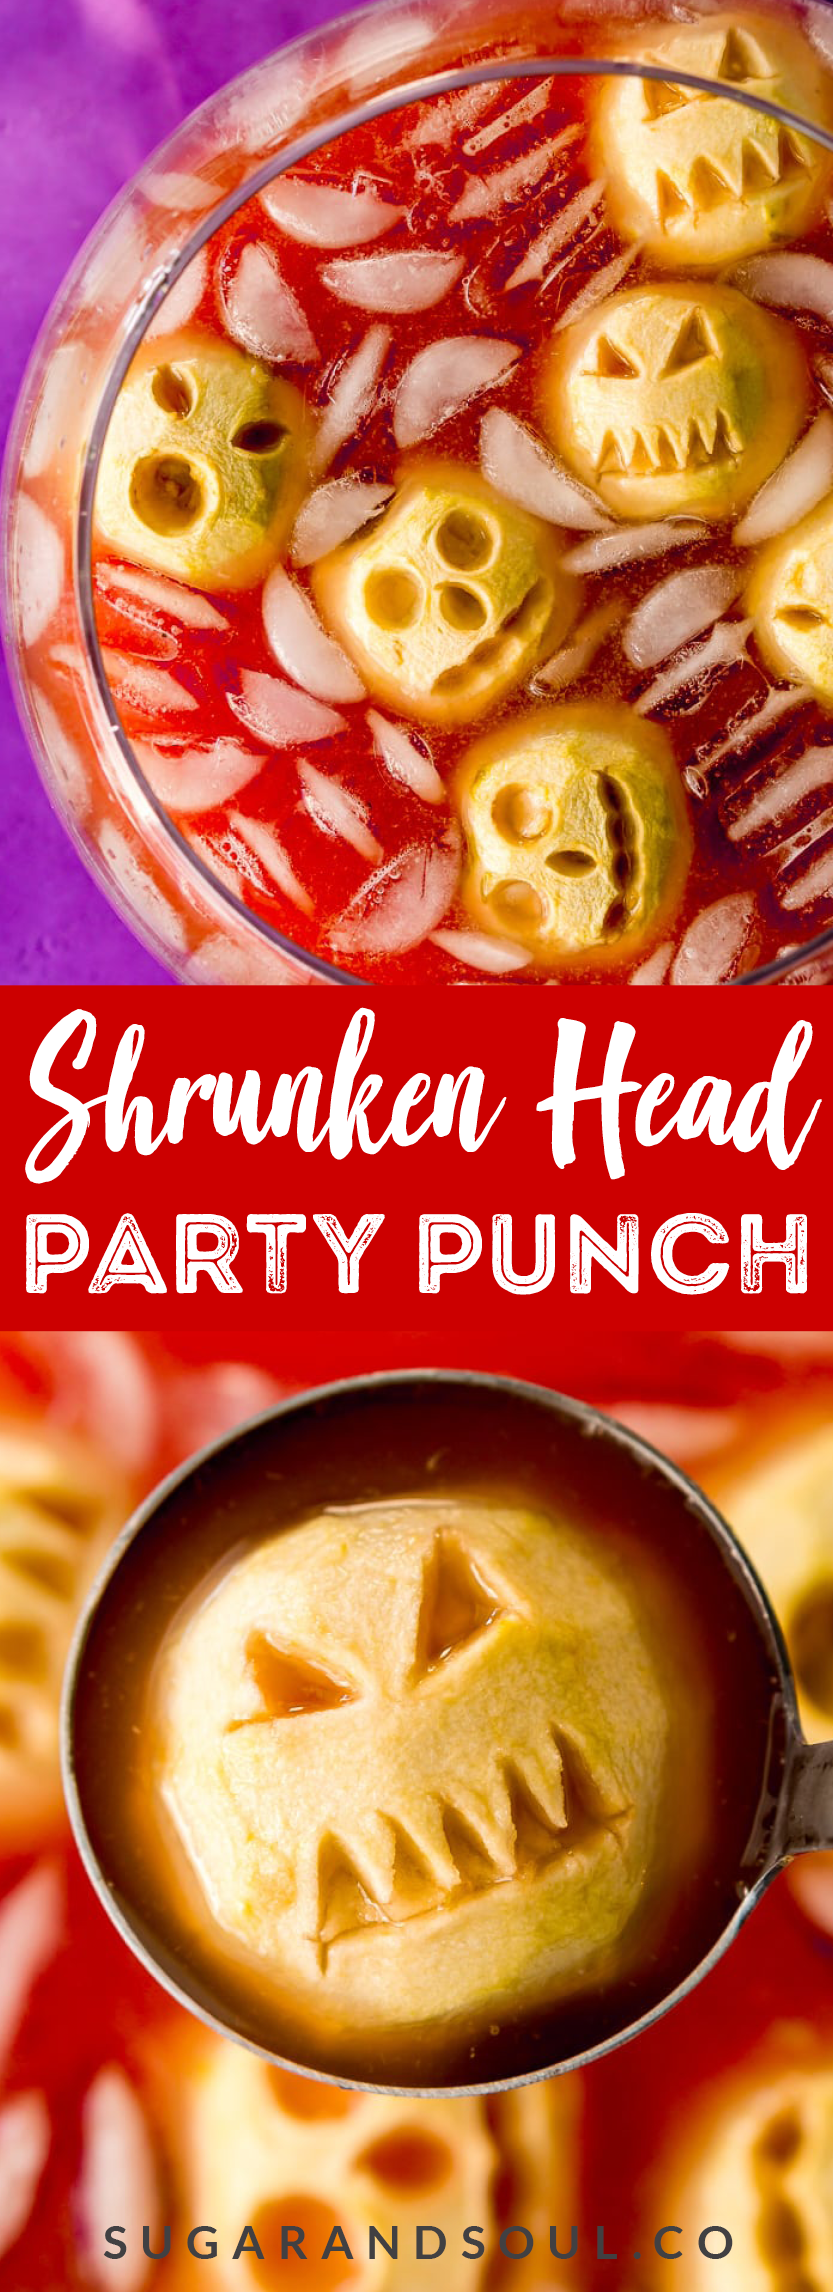 Shrunken Head Party Punch doubles as a delicious drink and a creepy conversation piece! Made with fruit juices, lemon-lime soda, and a splash of grenadine, the best part of this beverage is the floating “shrunken heads” which are made with baked apples!